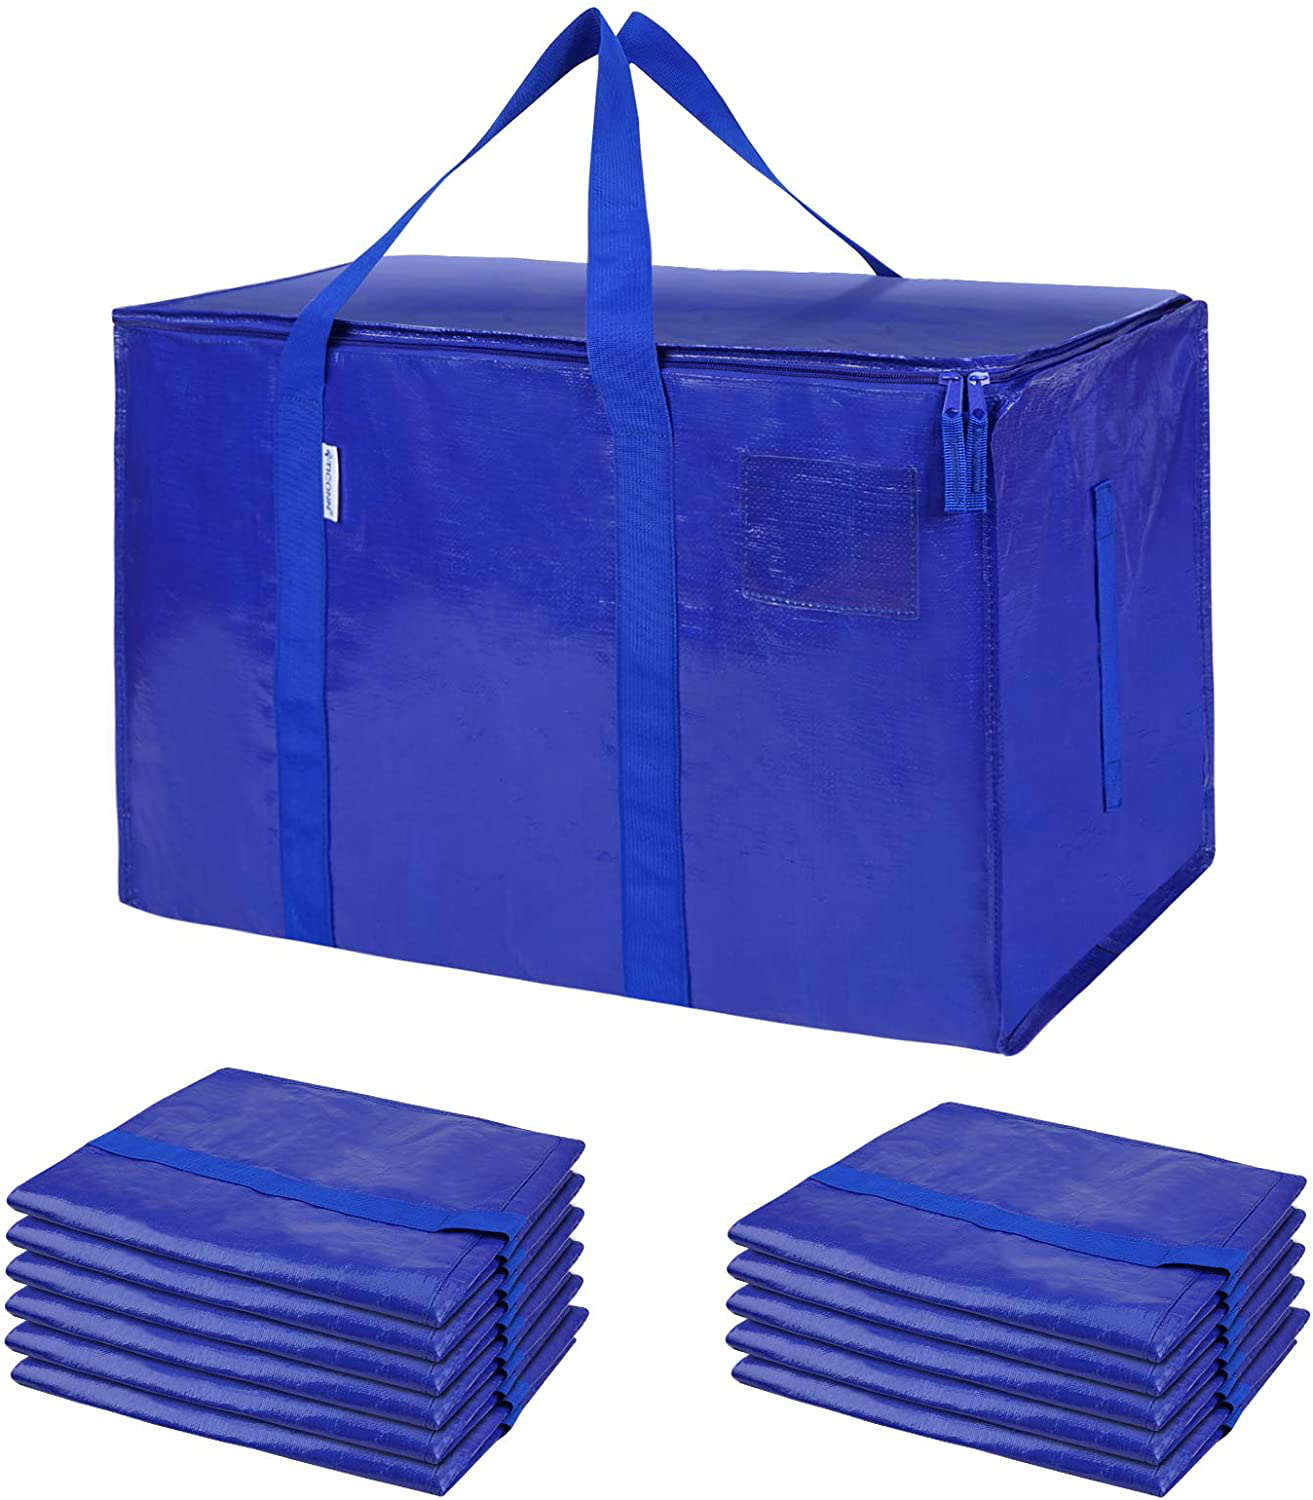 Extra Large Moving Bags with Zippers & Carrying Handles, Heavy-Duty Storage Tote for Space Saving Moving Storage (Blue)